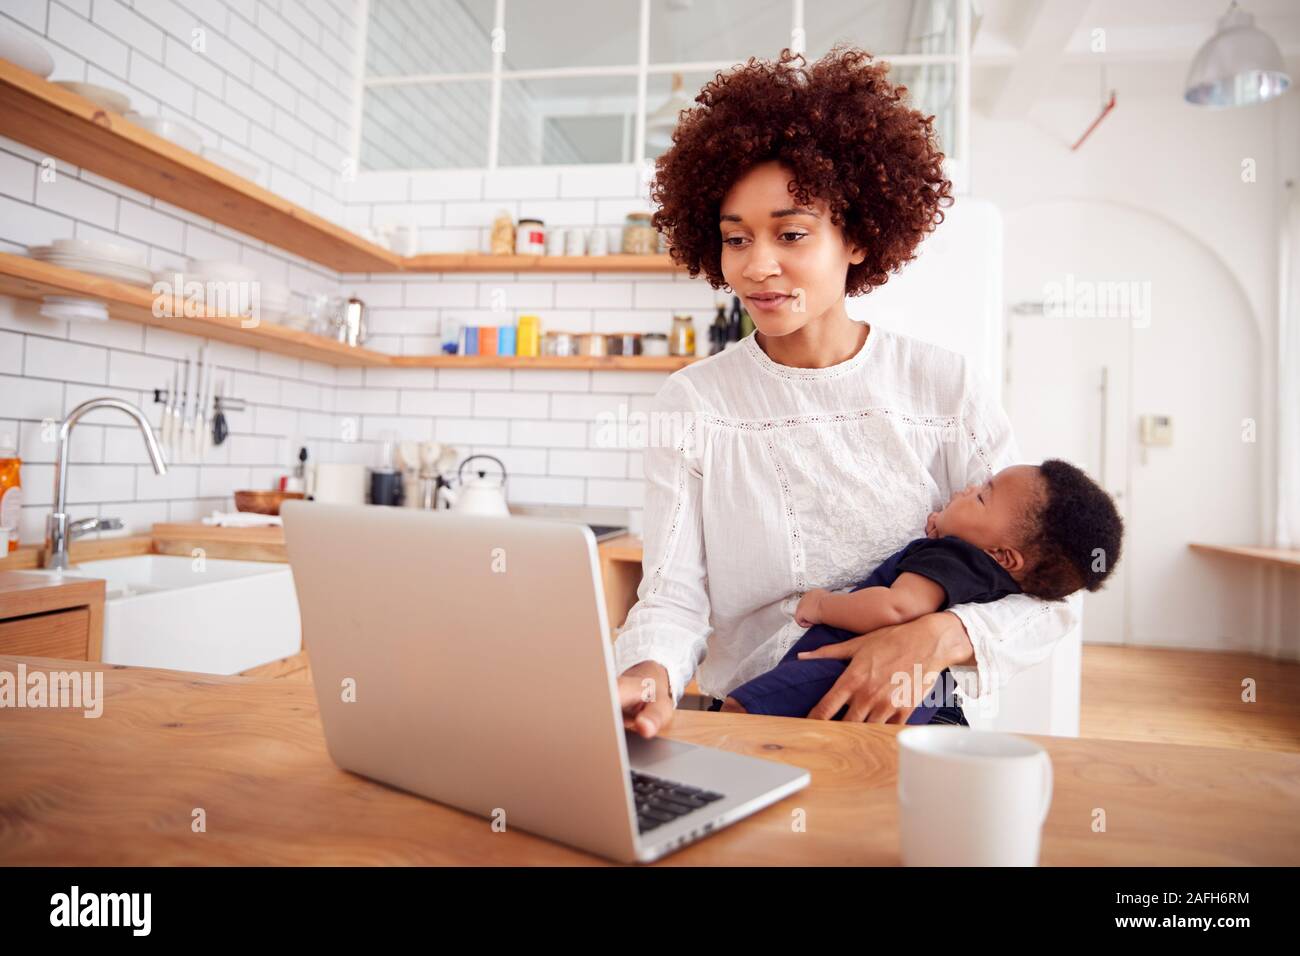 Multi-Tasking Mother Holds Sleeping Baby Son And Works On Laptop Computer In Kitchen Stock Photo